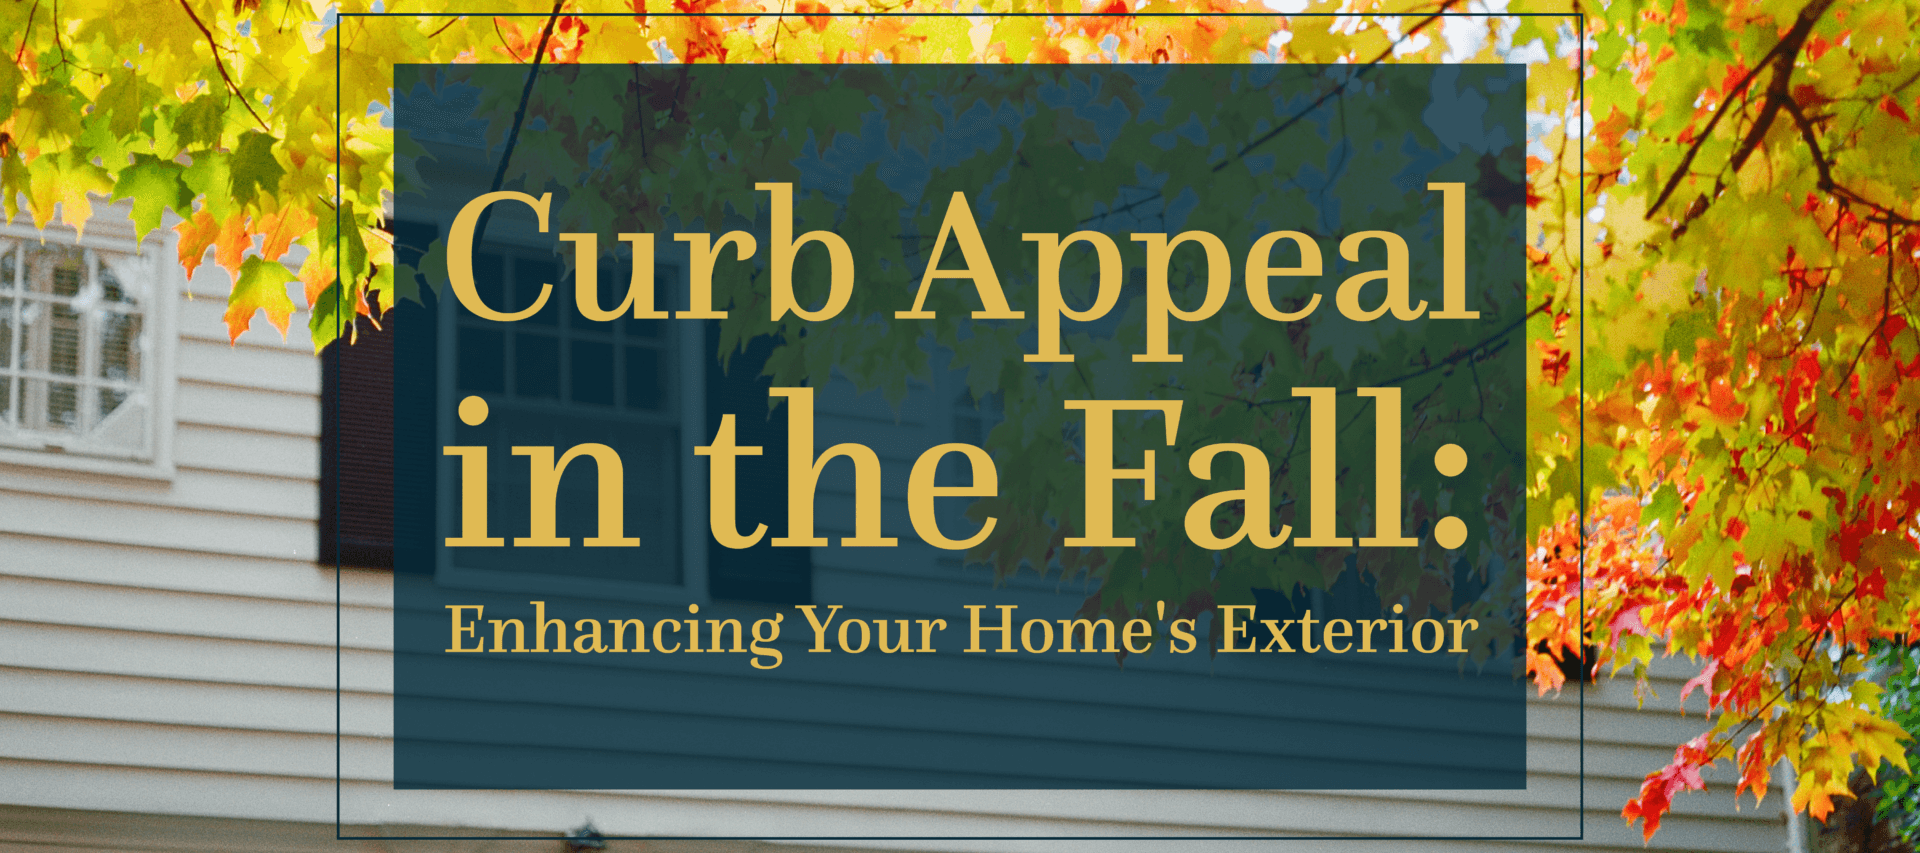 Curb Appeal in the Fall: Enhancing Your Home's Exterior